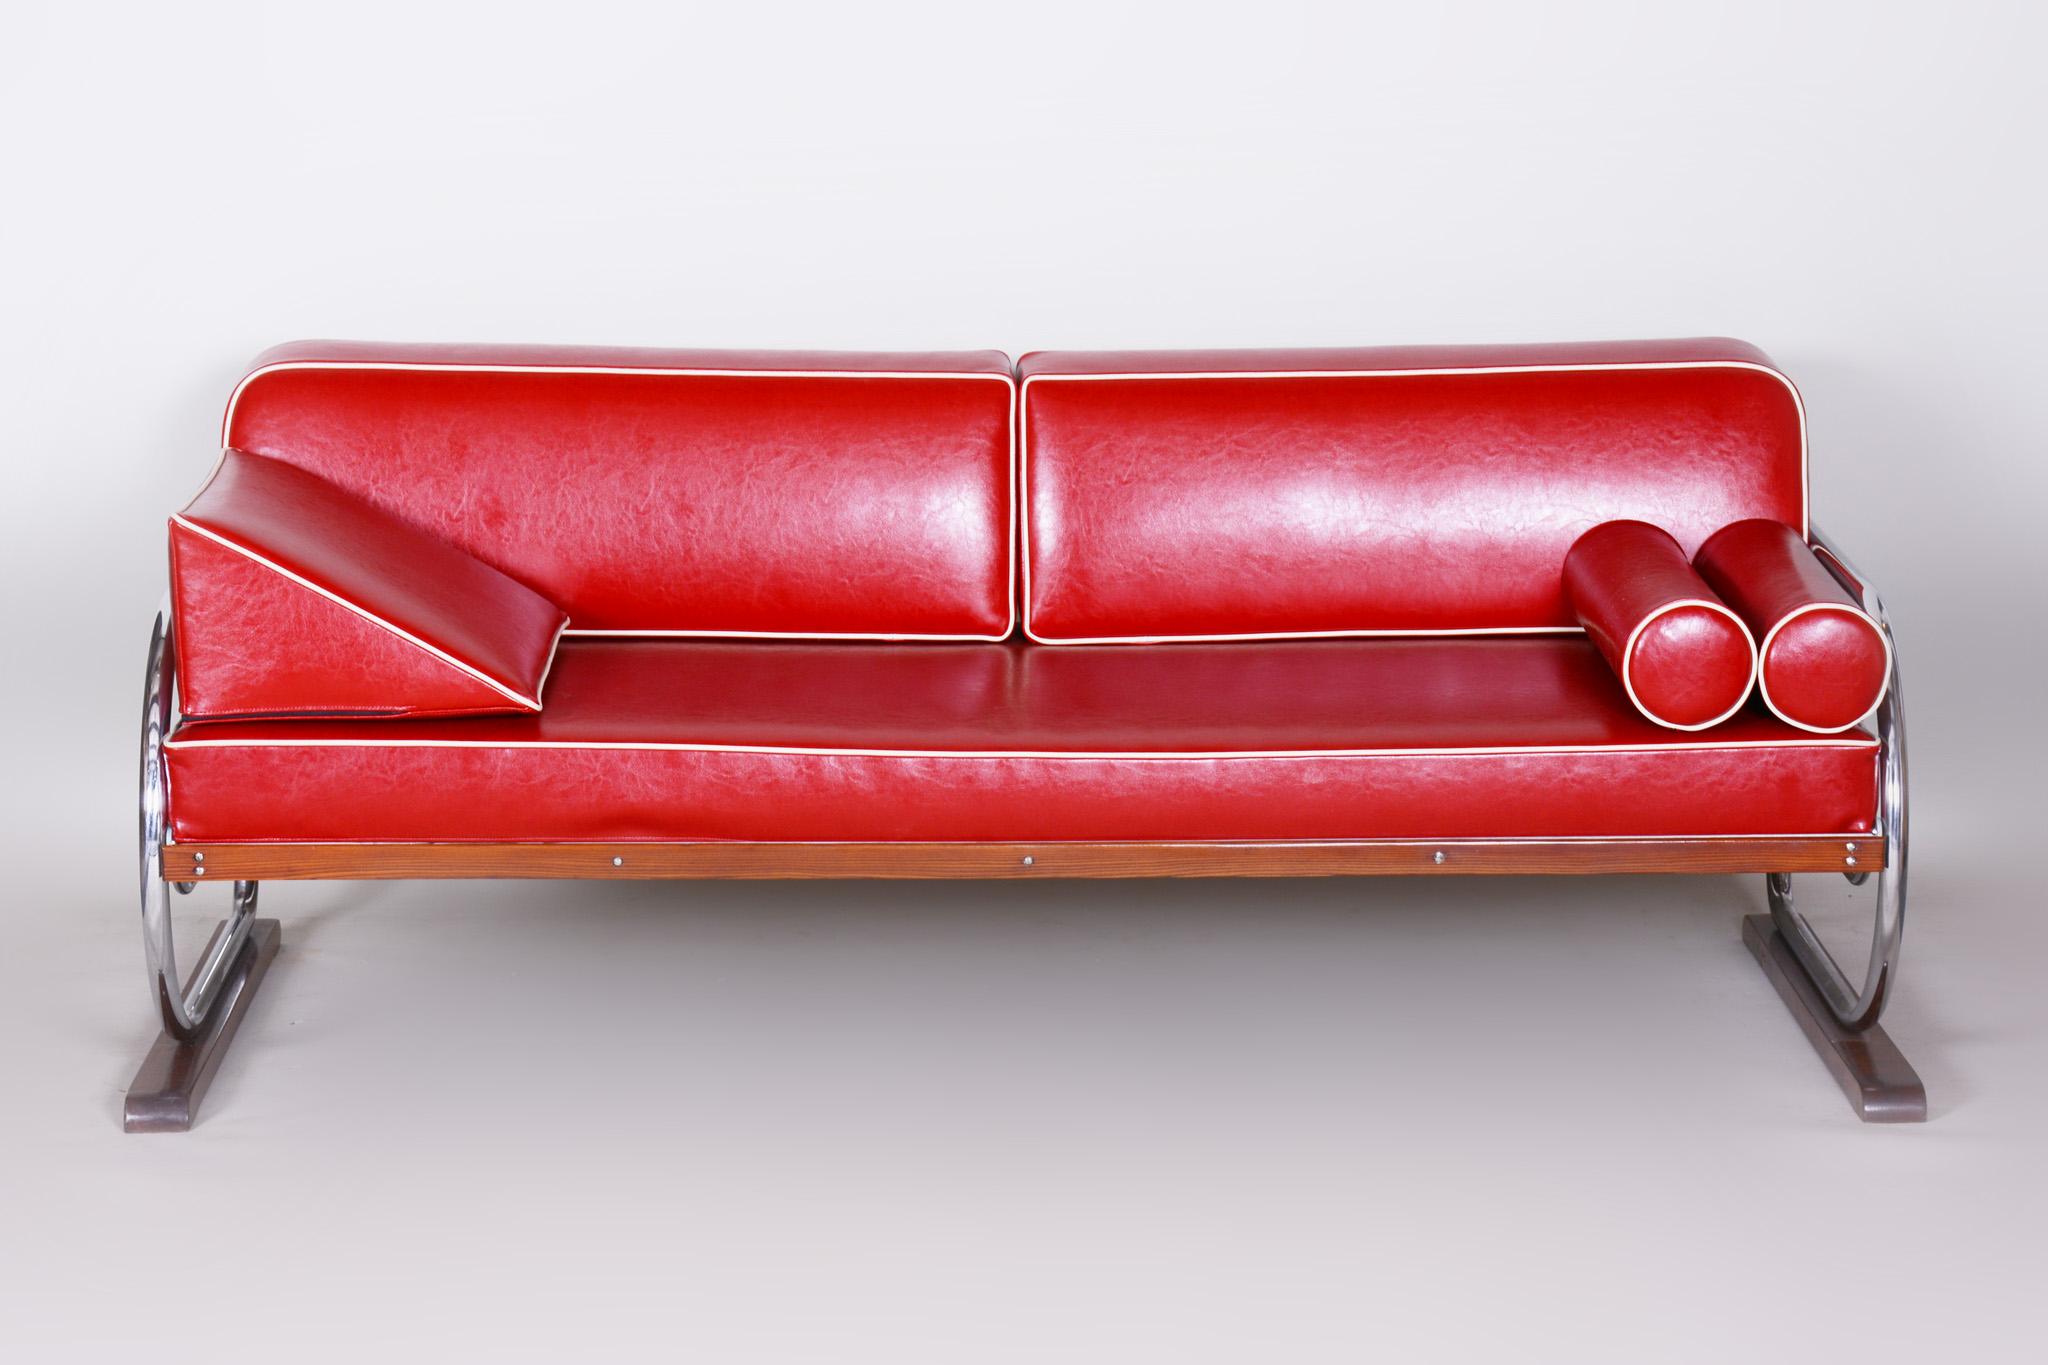 Bauhaus style sofa with chrome tubular steel frame.
Manufactured by Robert Slezák in the 1930s.
Chrome tubular steel is in perfect original condition.
Upholstered to high quality red leather.
Source: Czechoslovakia.